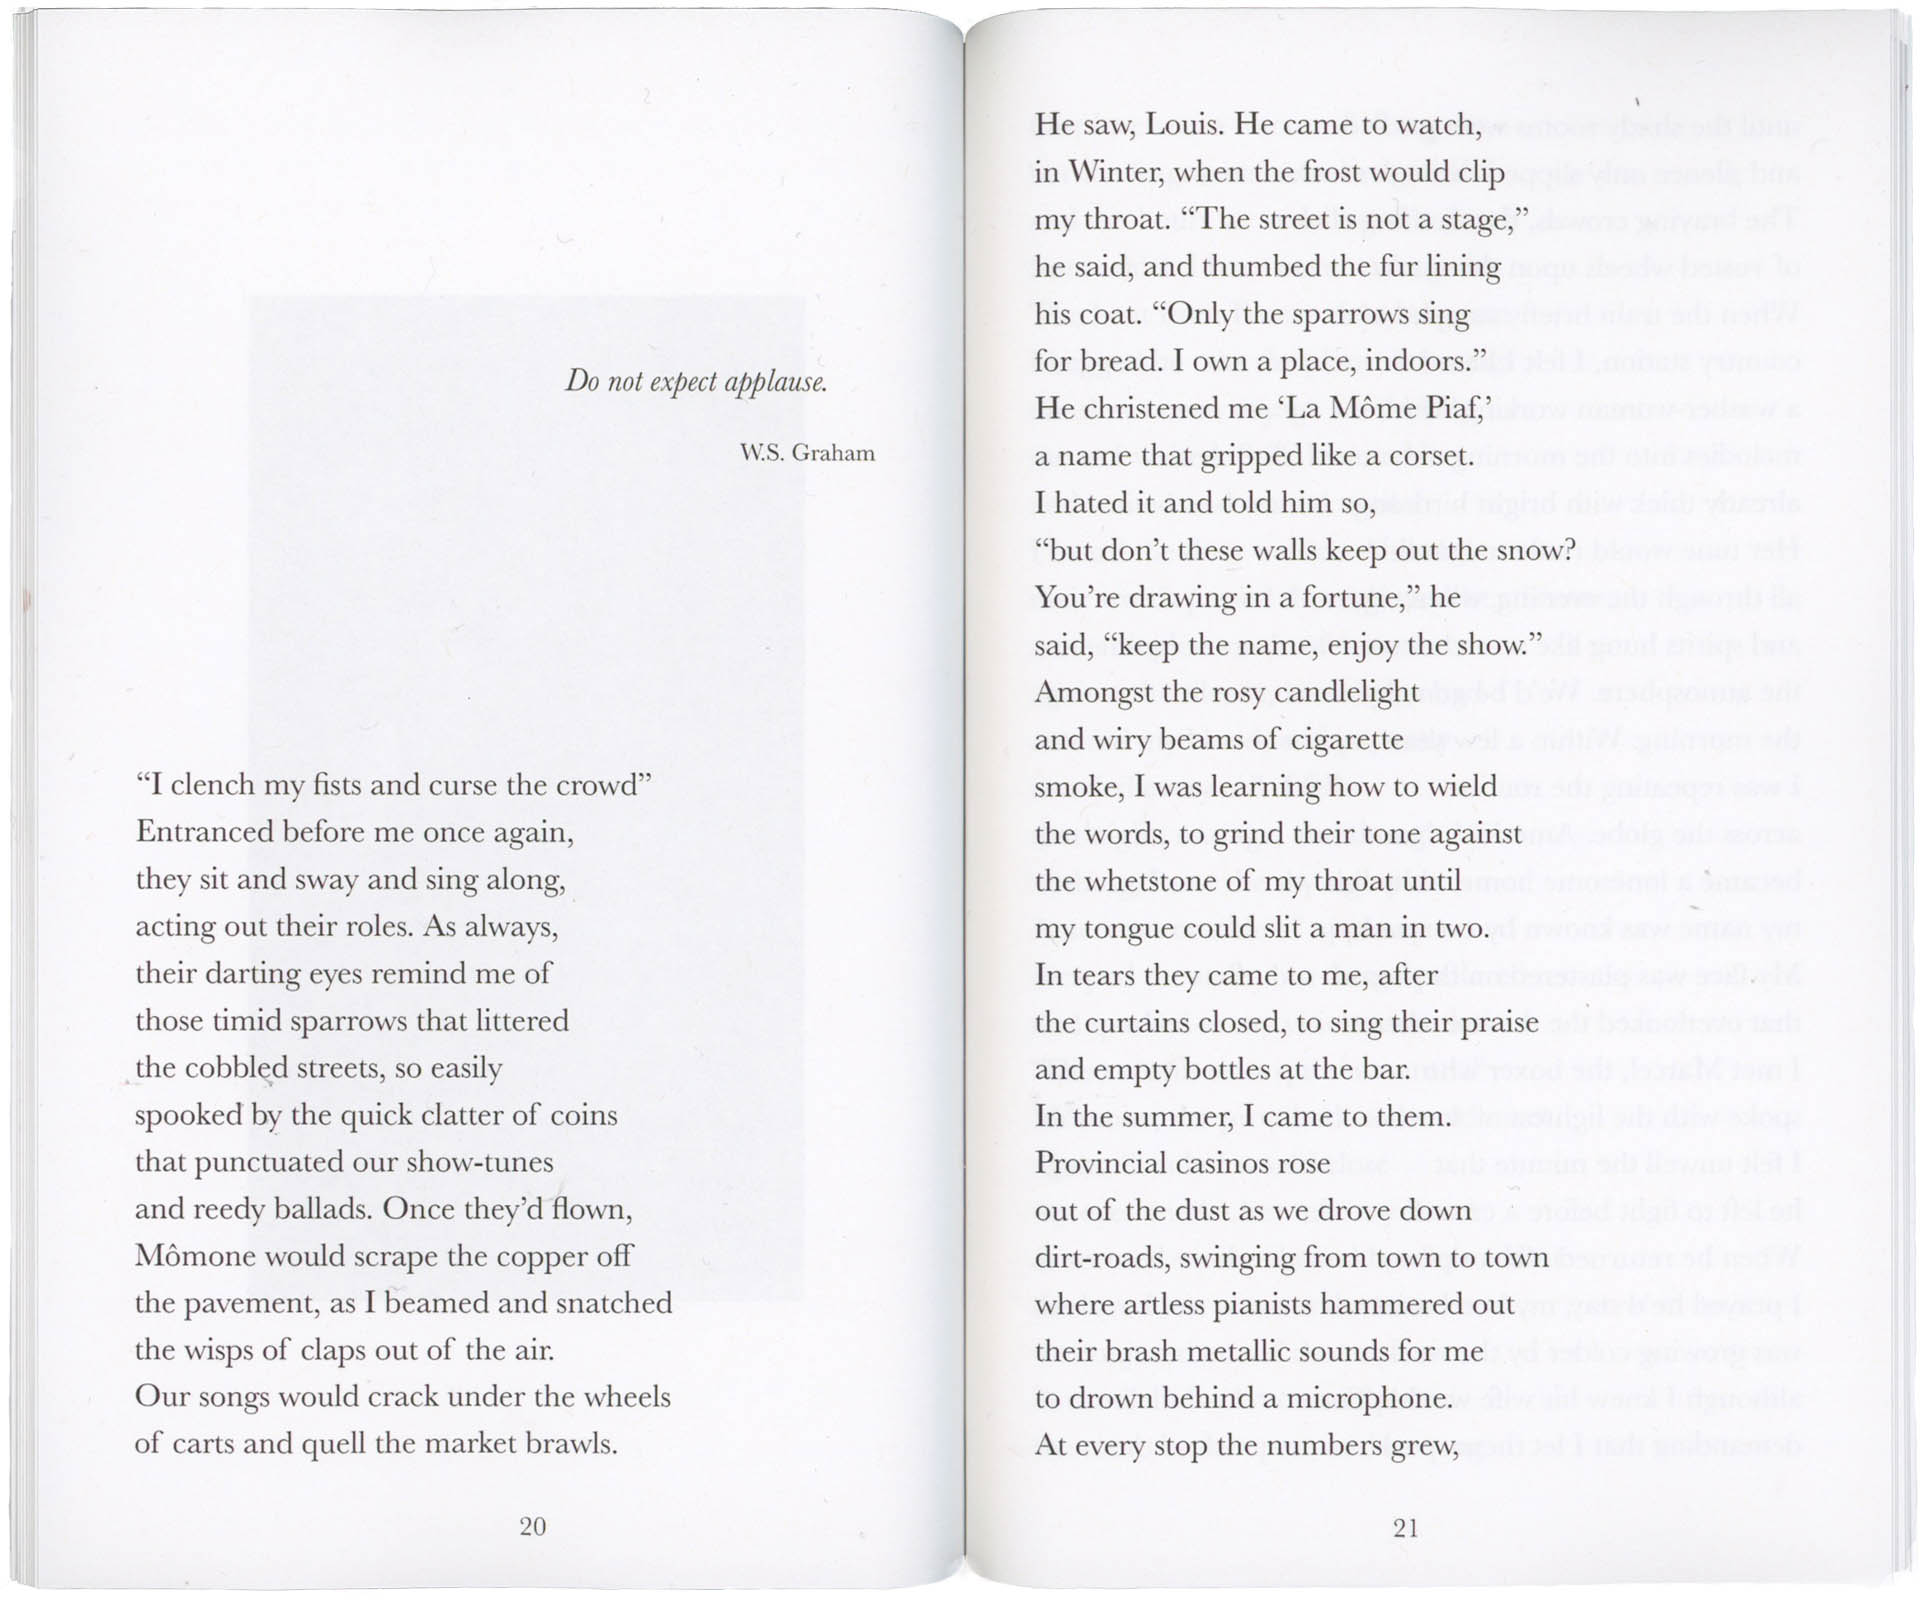 A scan of a two-page spread showing an epigraph and the start of a long poem. The full text can be found in the pdf at the top of the page.